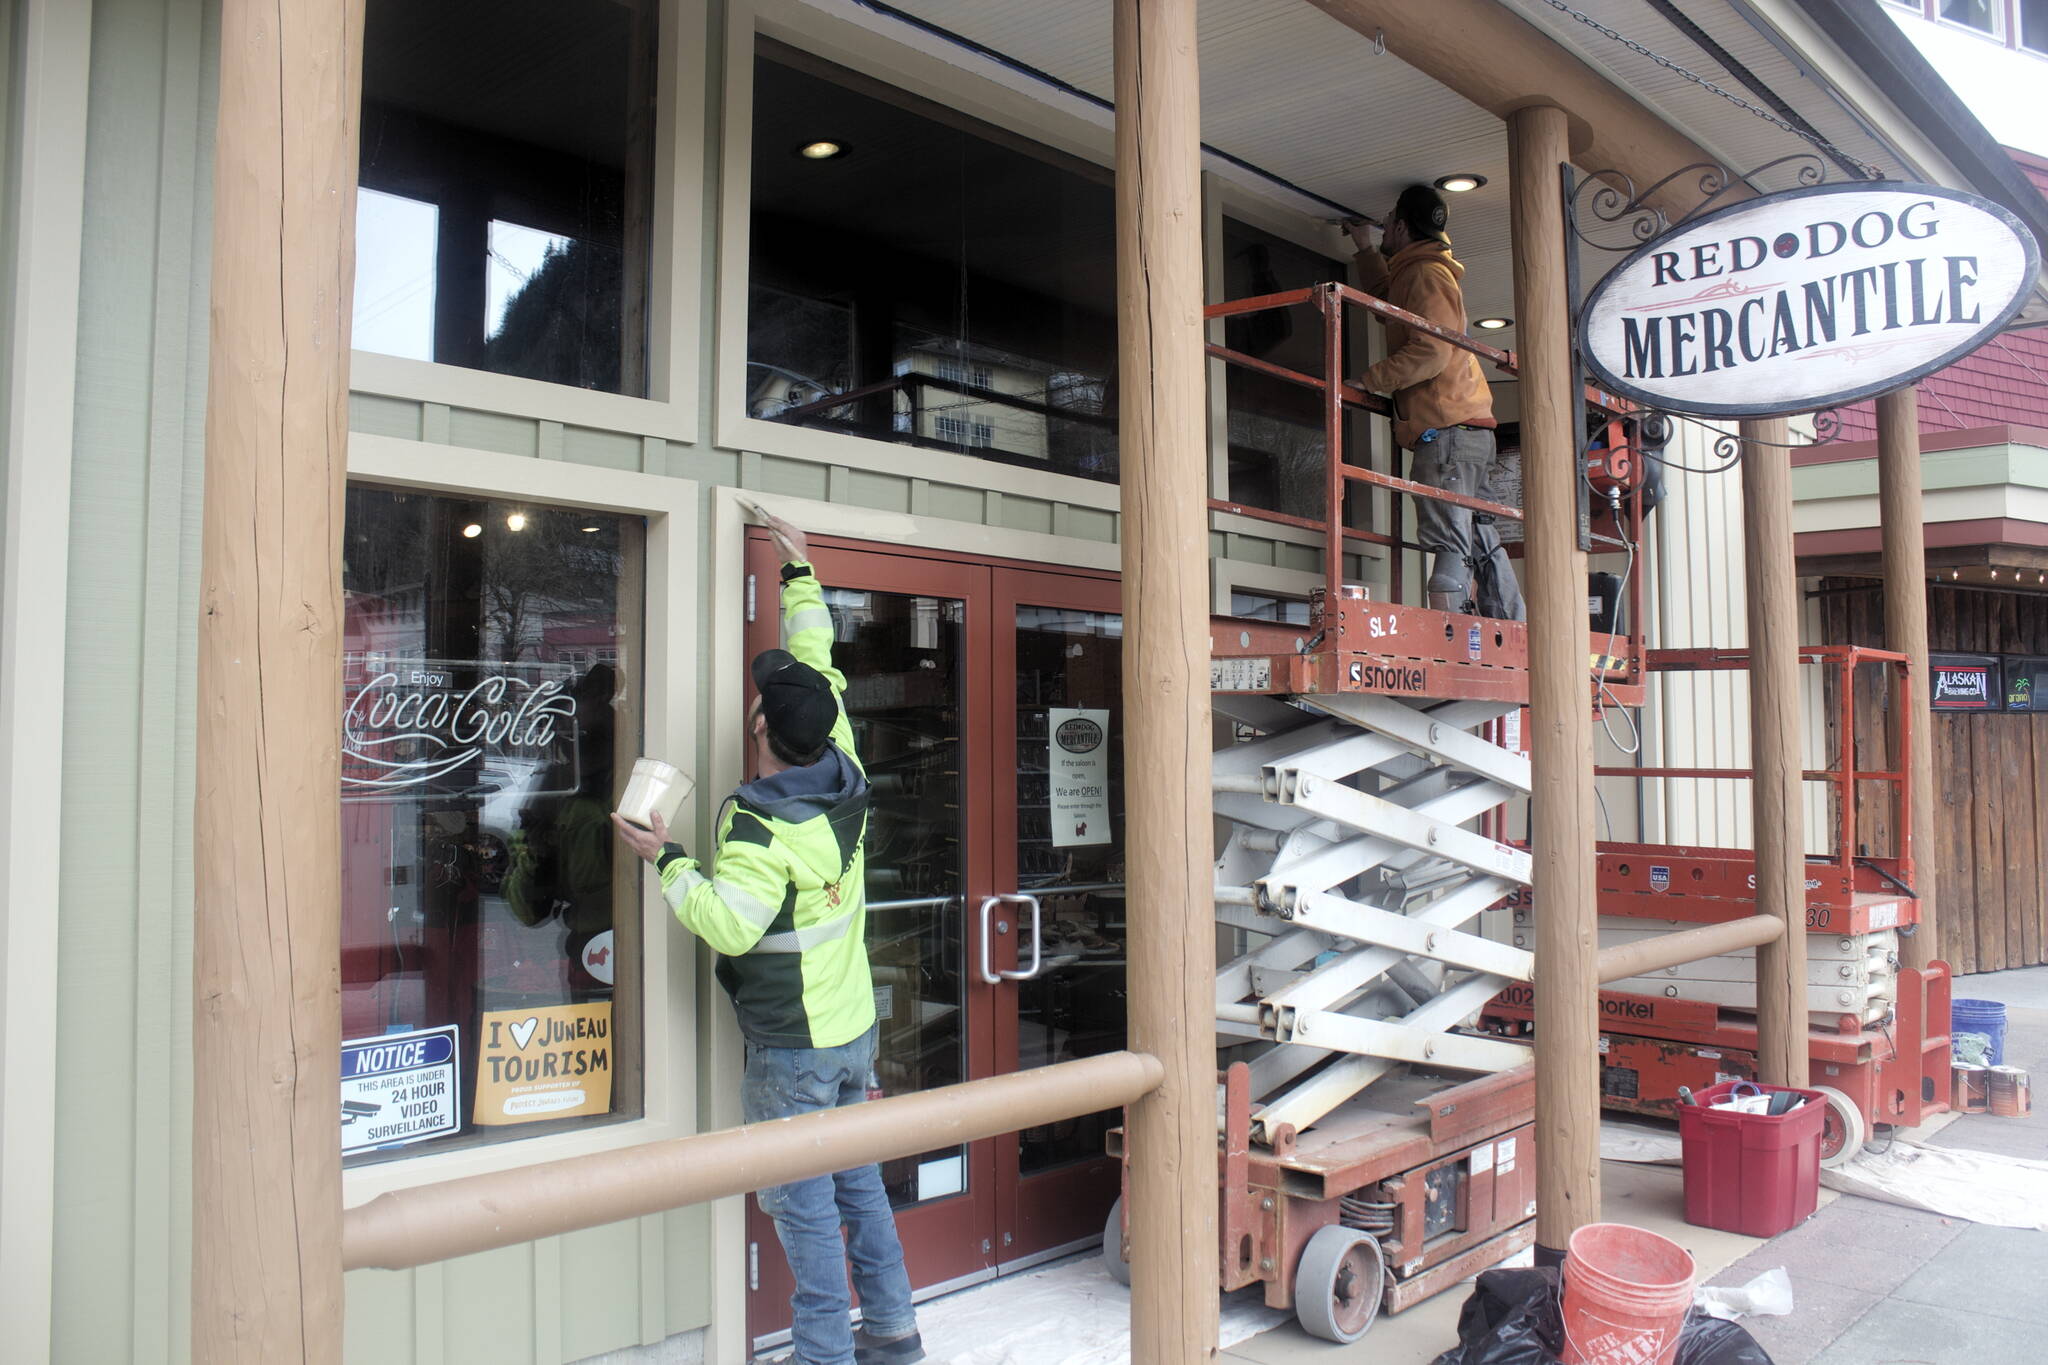 Kyle Brownlee, left, and Joseph Cox of Island Contractors paint the storefront of Red Dog Mercantile on Friday as downtown merchants get ready to welcome the first cruise ship of the year on Monday. (Mark Sabbatini / Juneau Empire)